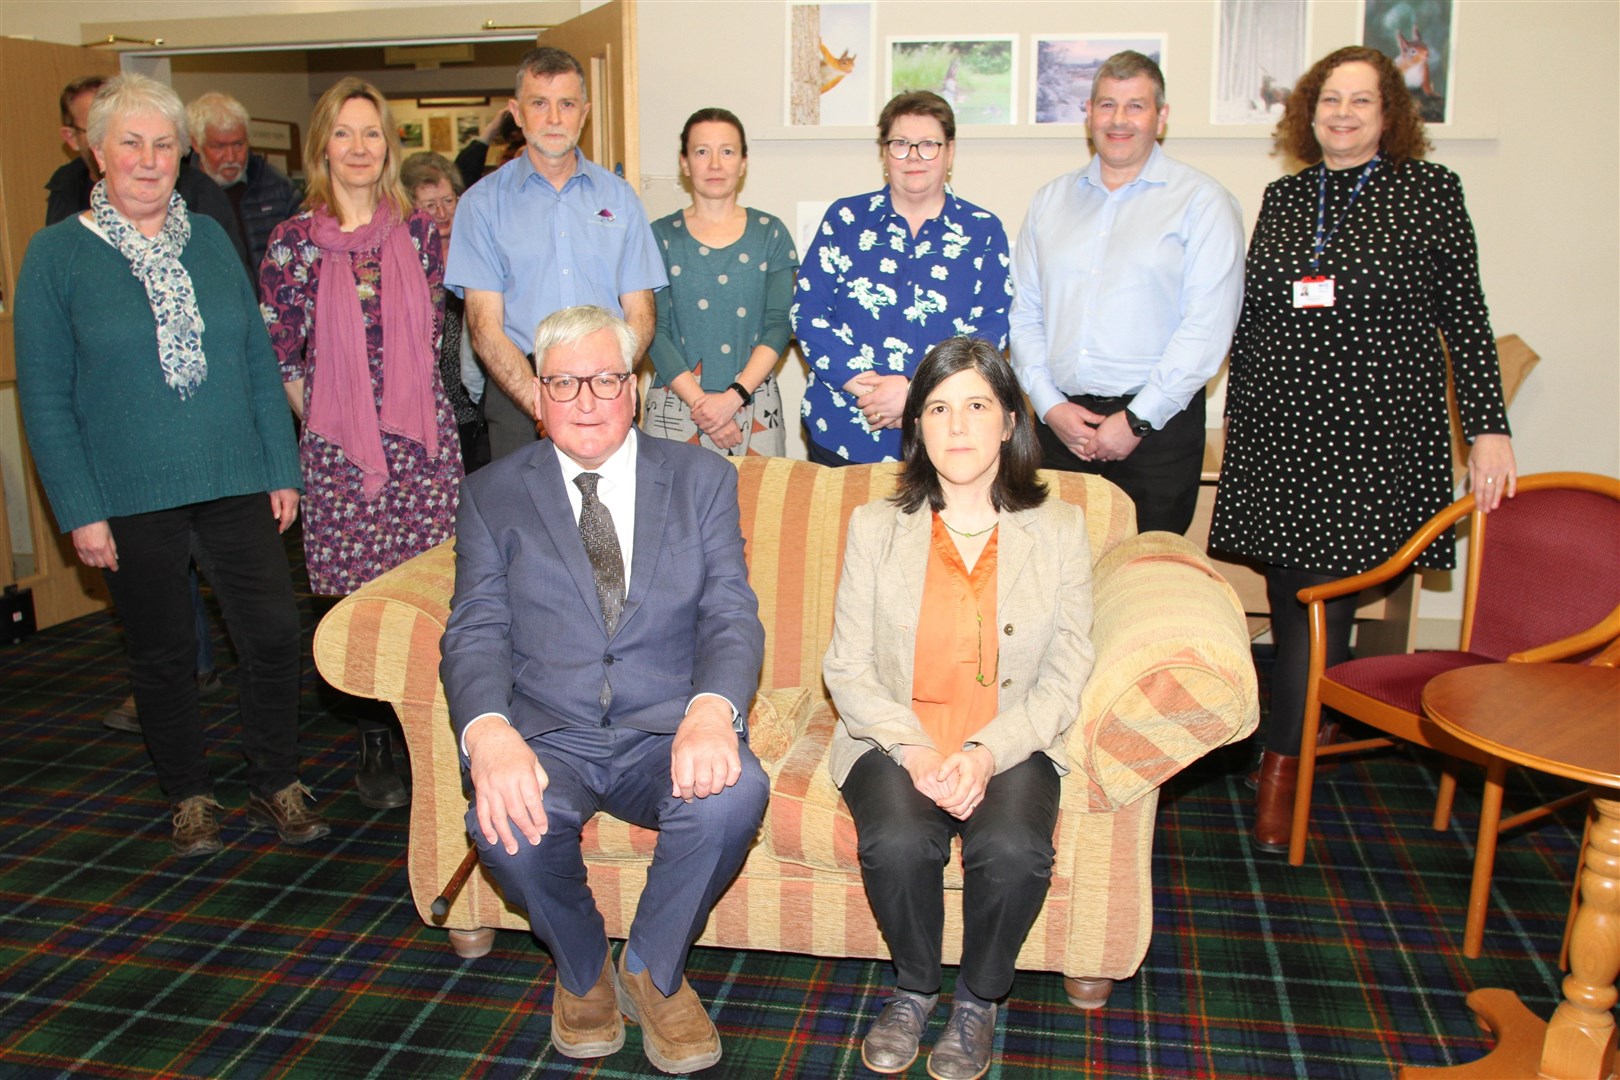 Fergus Ewing (seated) at the recent public meeting held by Grantown GPs and staff who are also pictured.